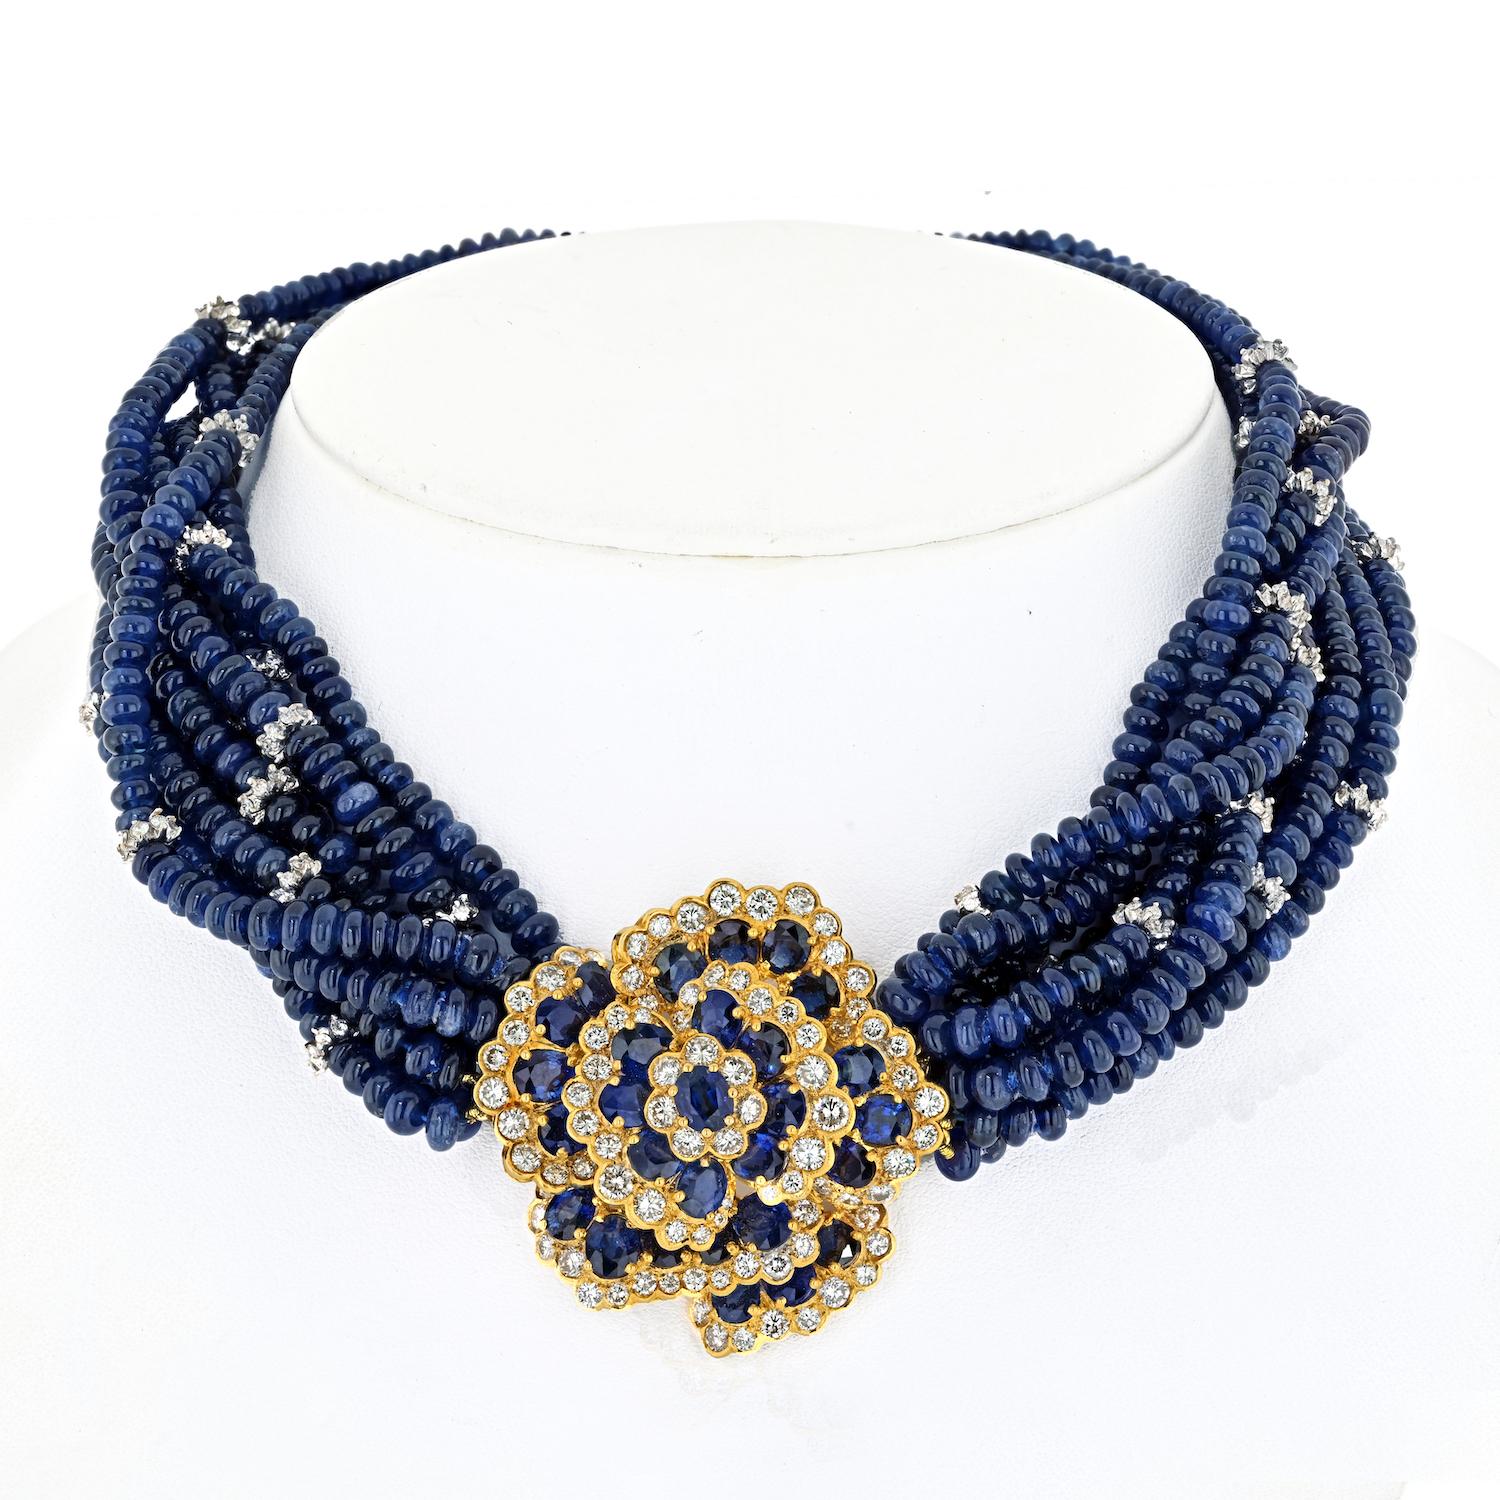 Dive into the lavish allure of this Sapphire Beads 18K Yellow Gold Diamond Flower Multi-Strand Necklace—a testament to opulence and craftsmanship. Comprising nine graduated strands of genuine blue sapphire beads, this estate necklace is a statement